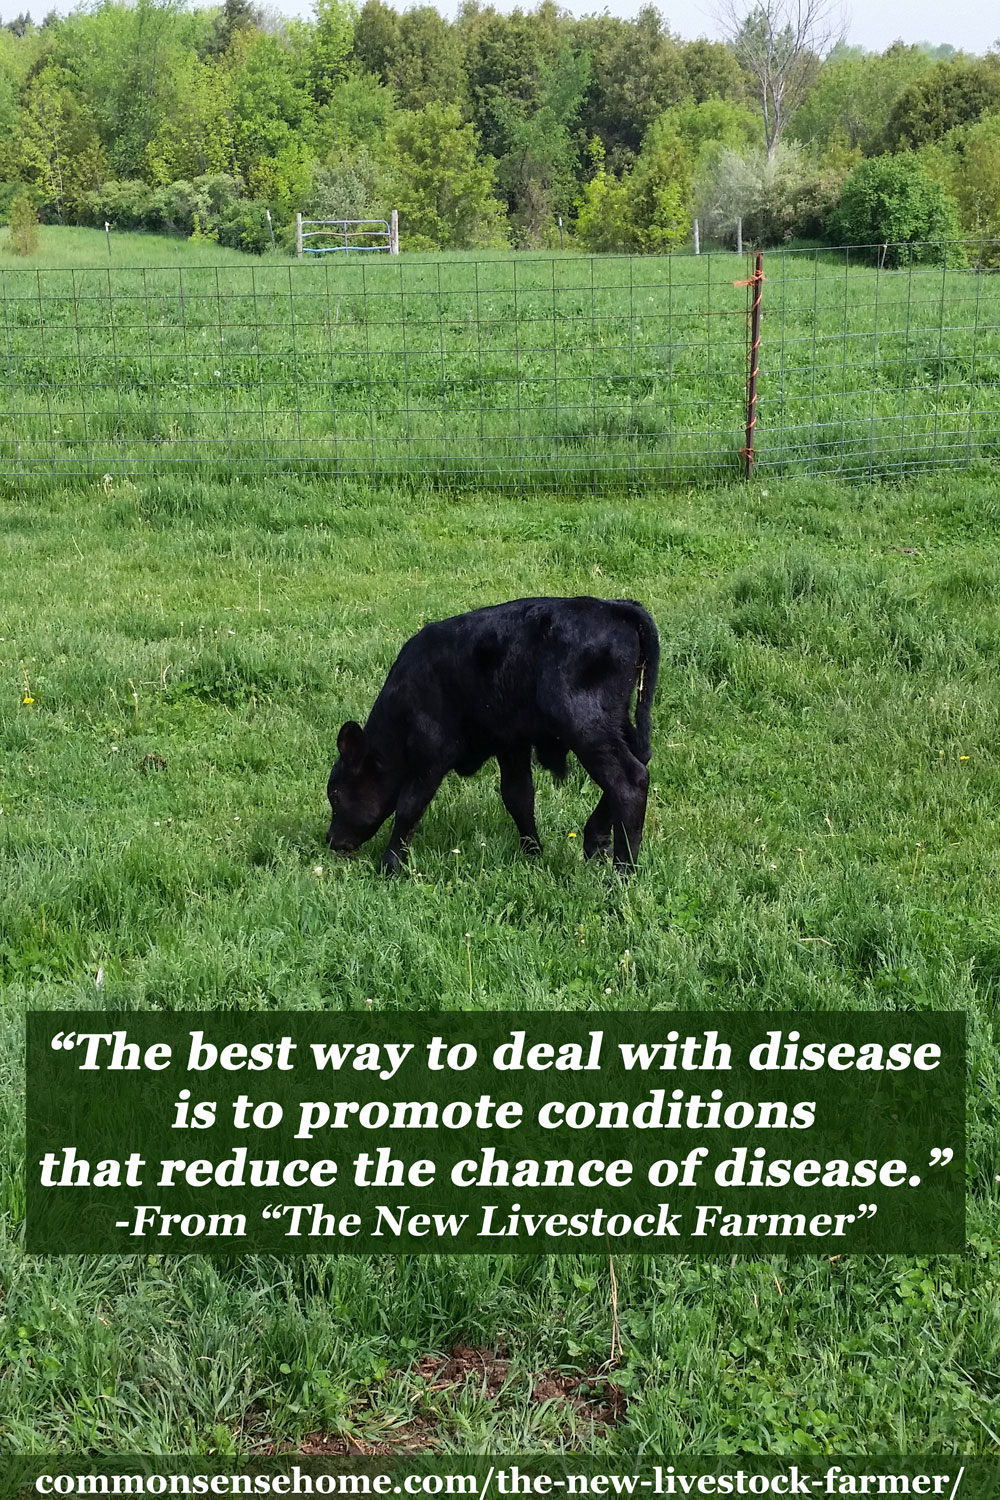 “The best way to deal with disease is to promote conditions that reduce the chance of disease.”